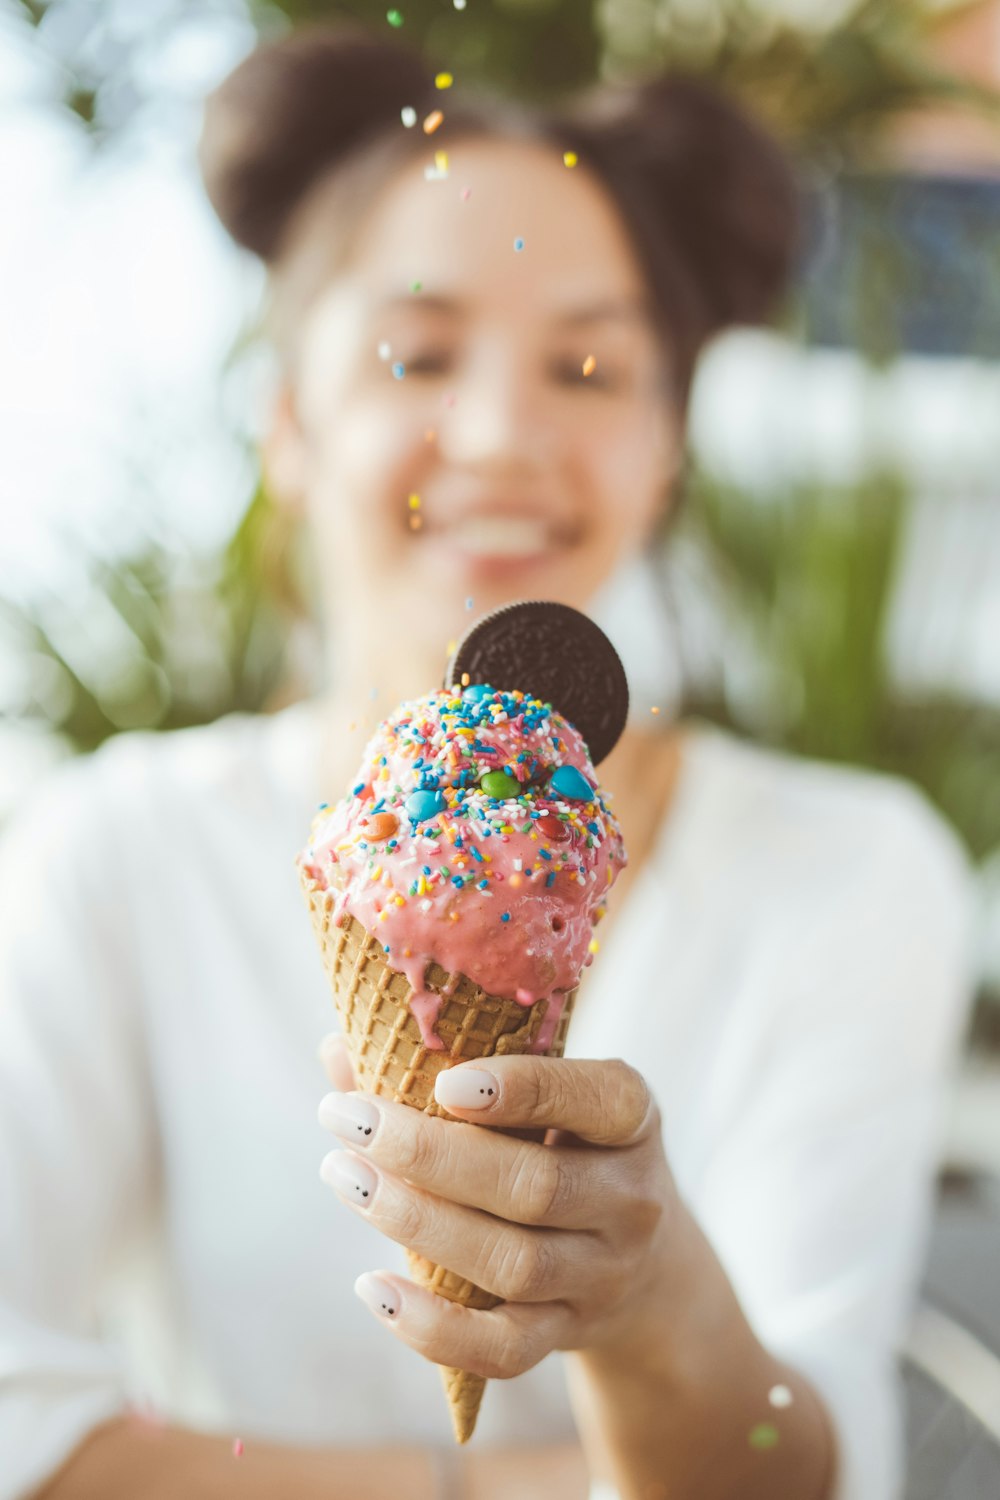 person holding ice cream cone with sprinkles